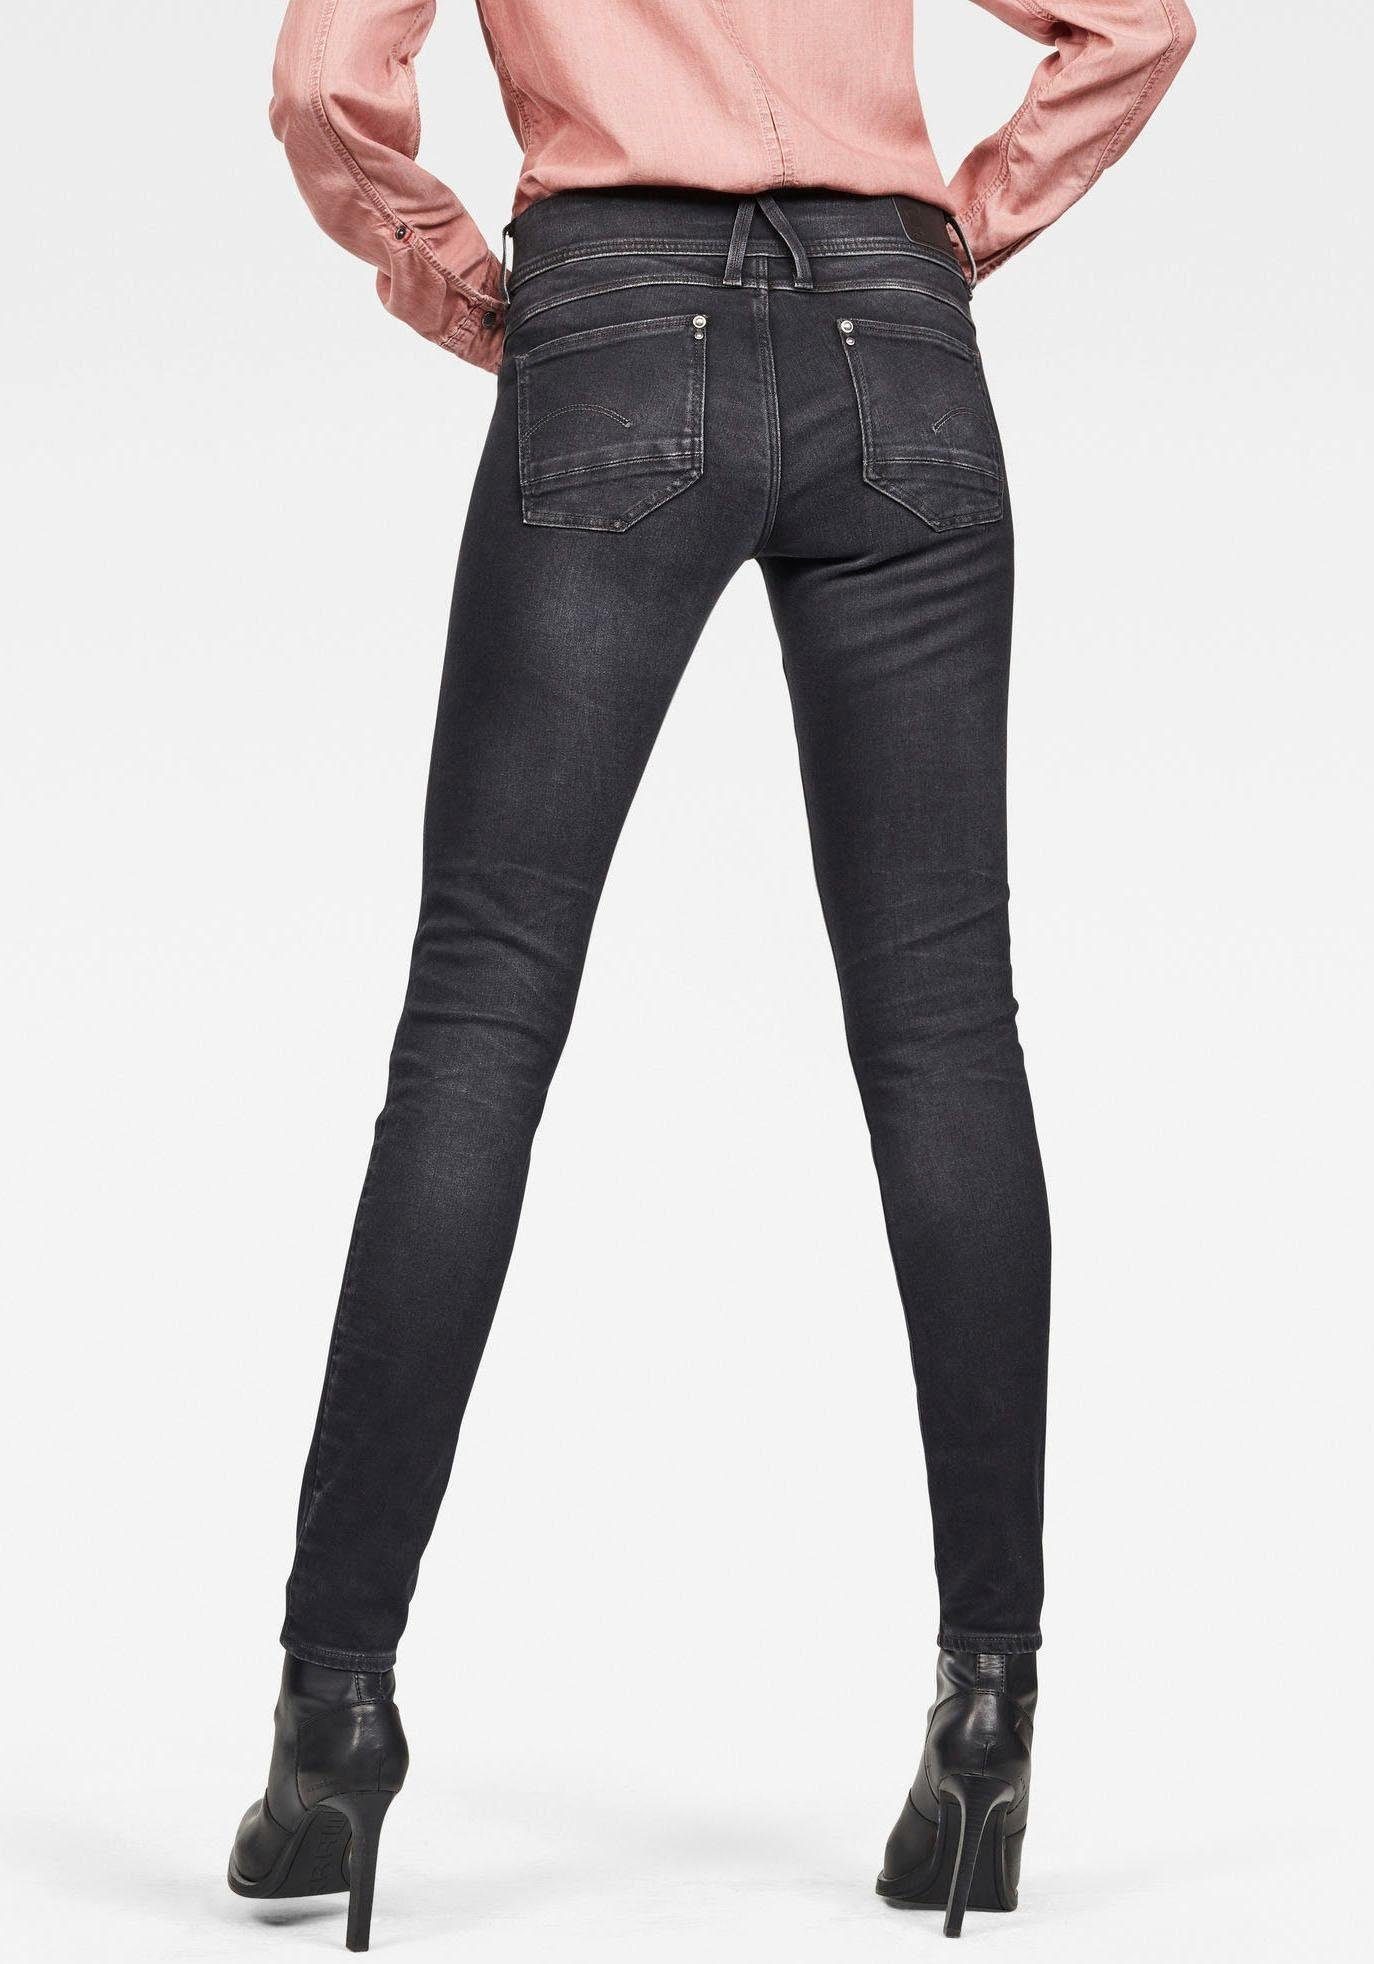 Form Taille in RAW Skinny Skinny-fit-Jeans G-Star mit fit mittelhoher mit 5-Pocket-Style Elasthan-Anteil, enger Skinny Waist Mid